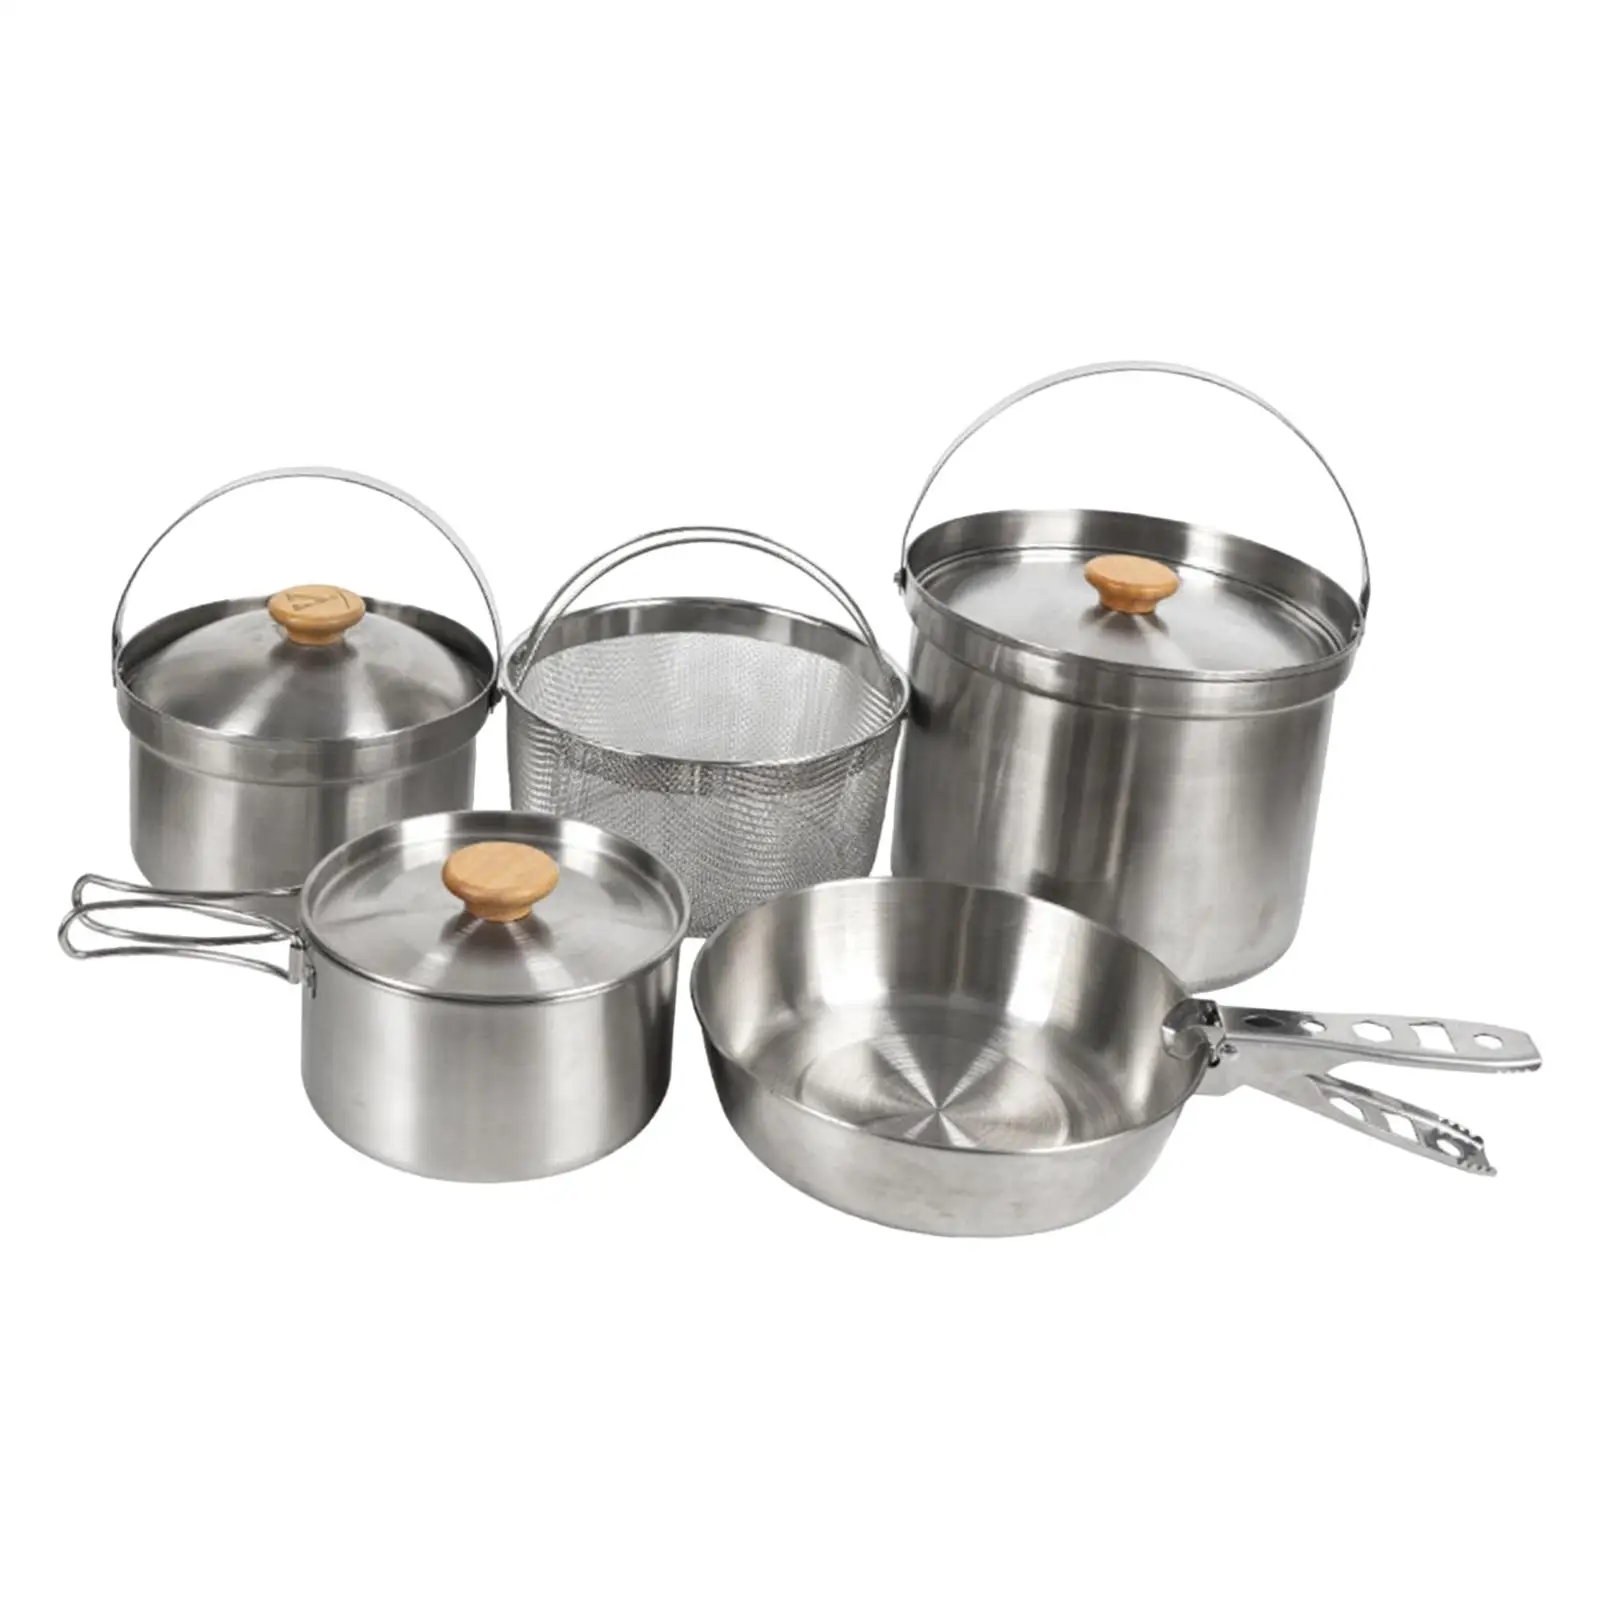 5x Stainless Steel Cooking Pot Set Camping Pan Picnic Tableware BBQ